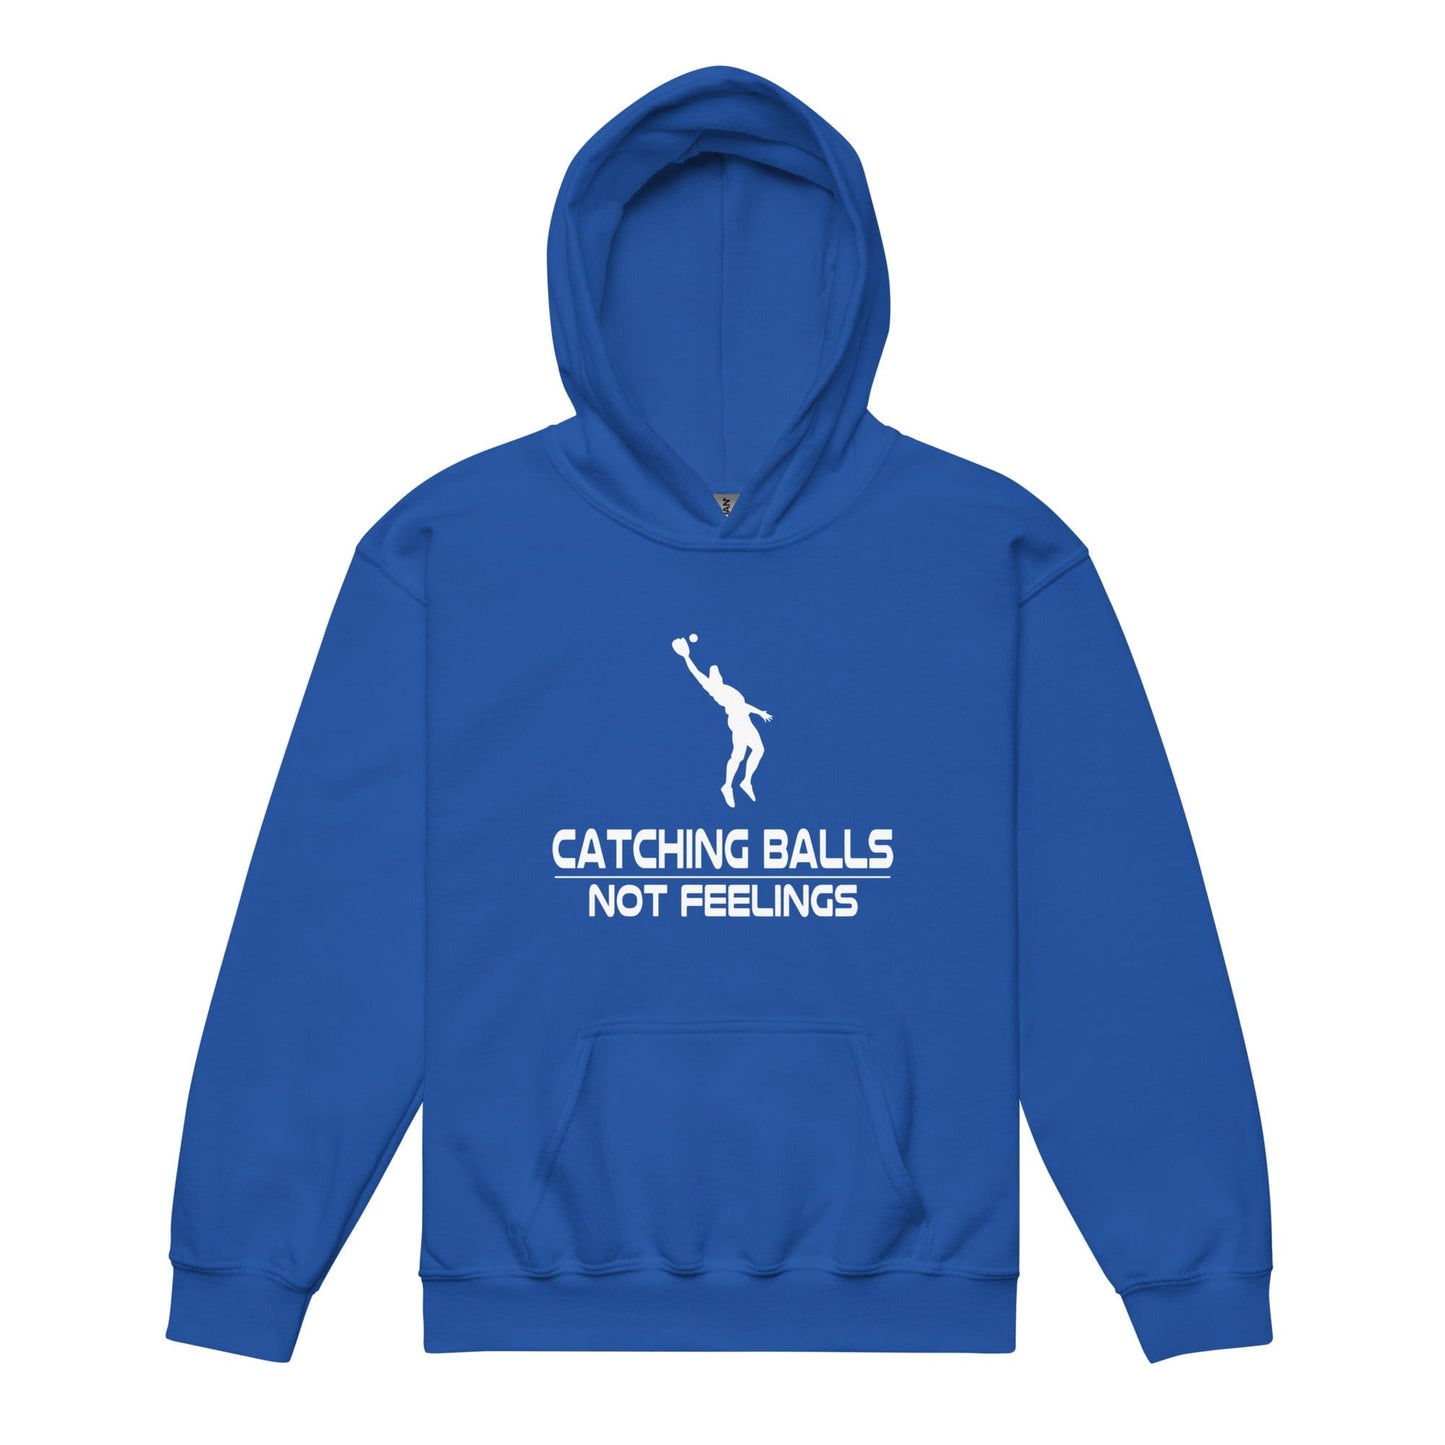 Catching Balls Not Feelings - Youth Hoodie